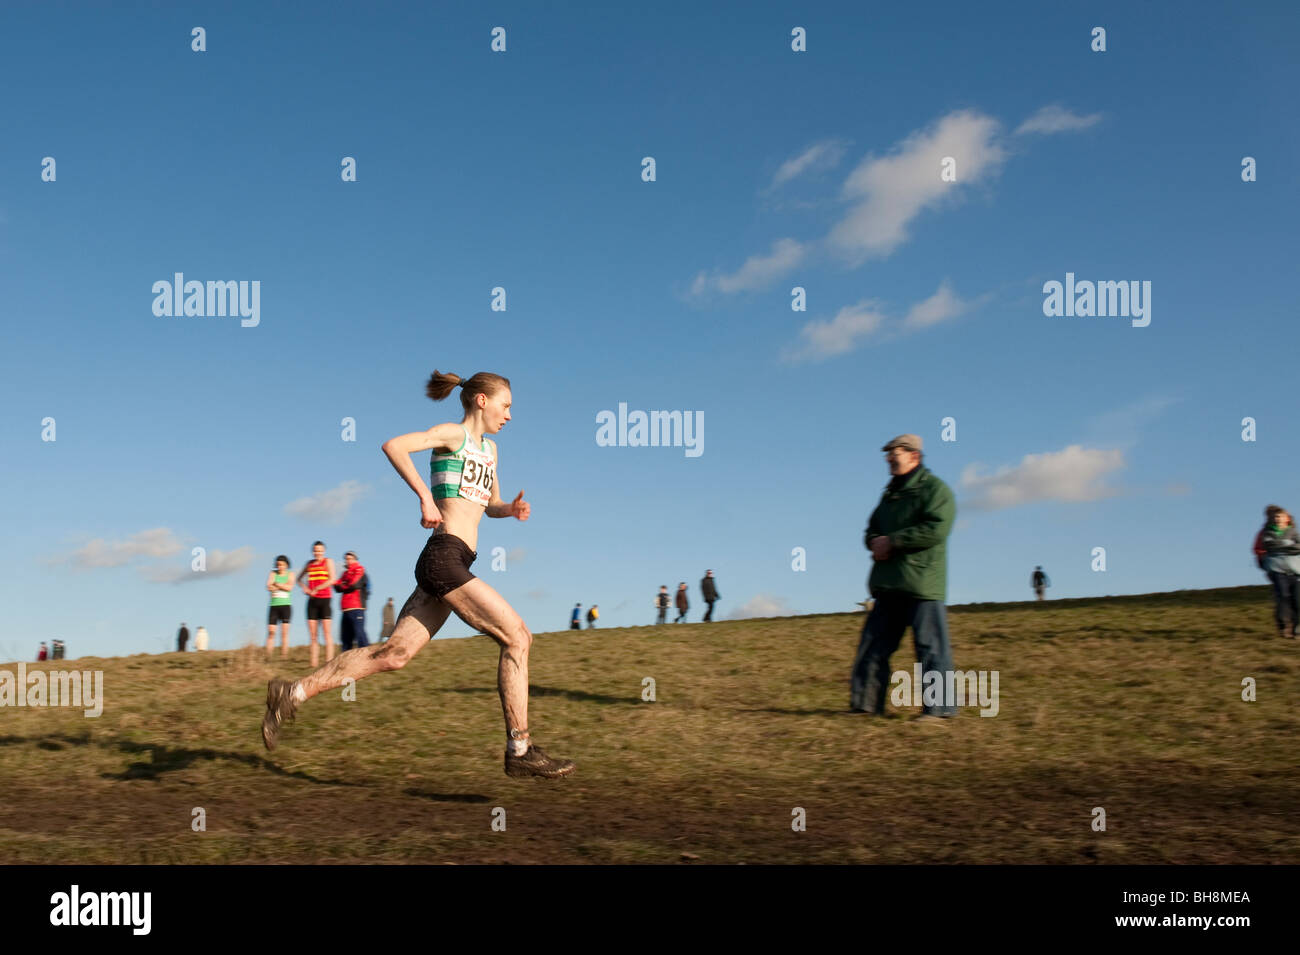 Jessica Sparke on final lap of South of England Cross Country Champs at Parliament Hill, London. Winner Senior women Stock Photo